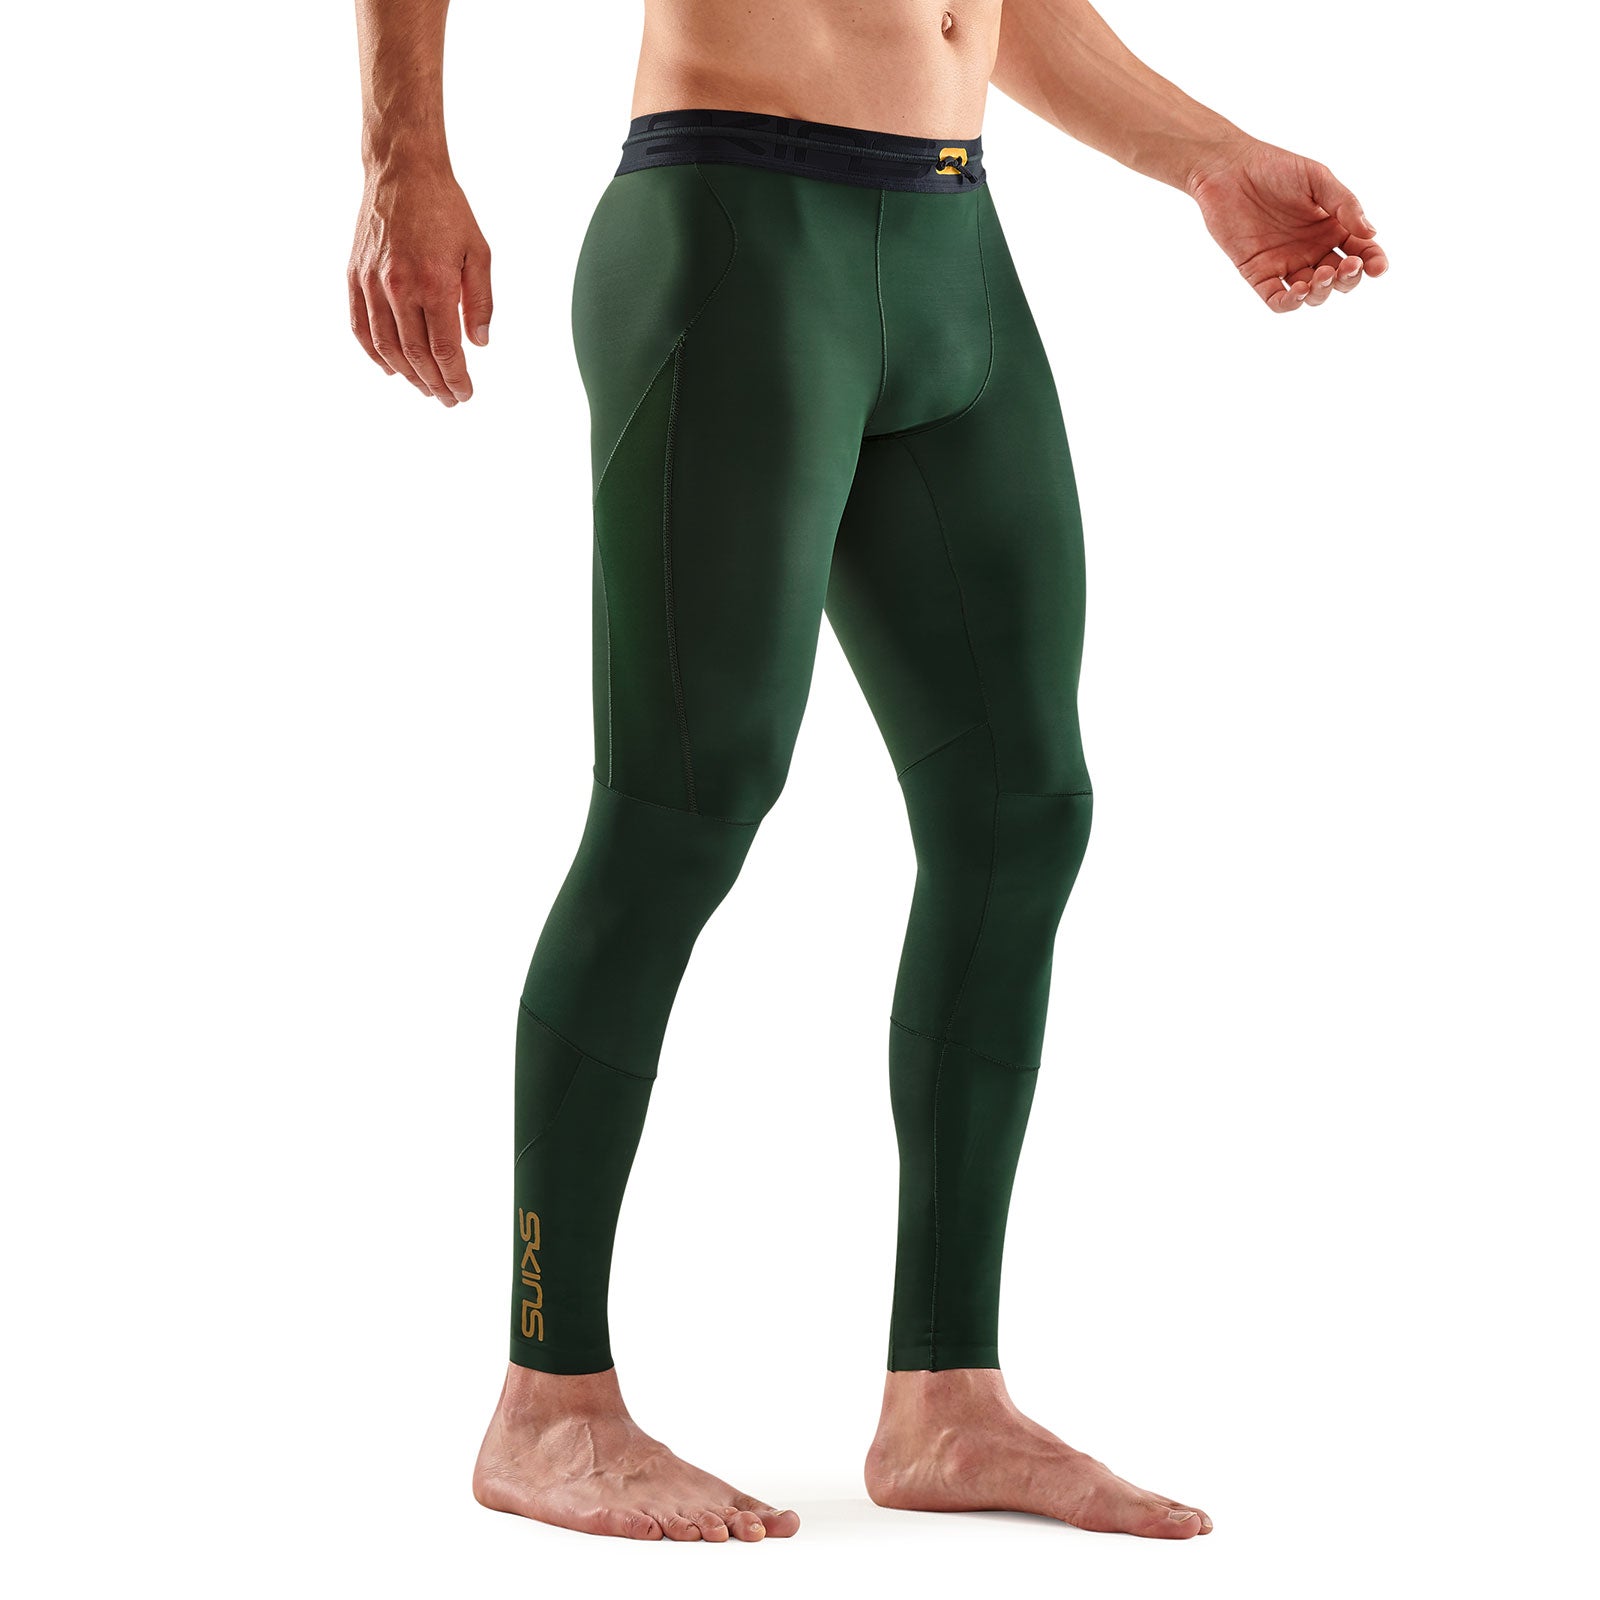 SKINS SERIES-5 Men's Long Tights Green Grey [Size: S]